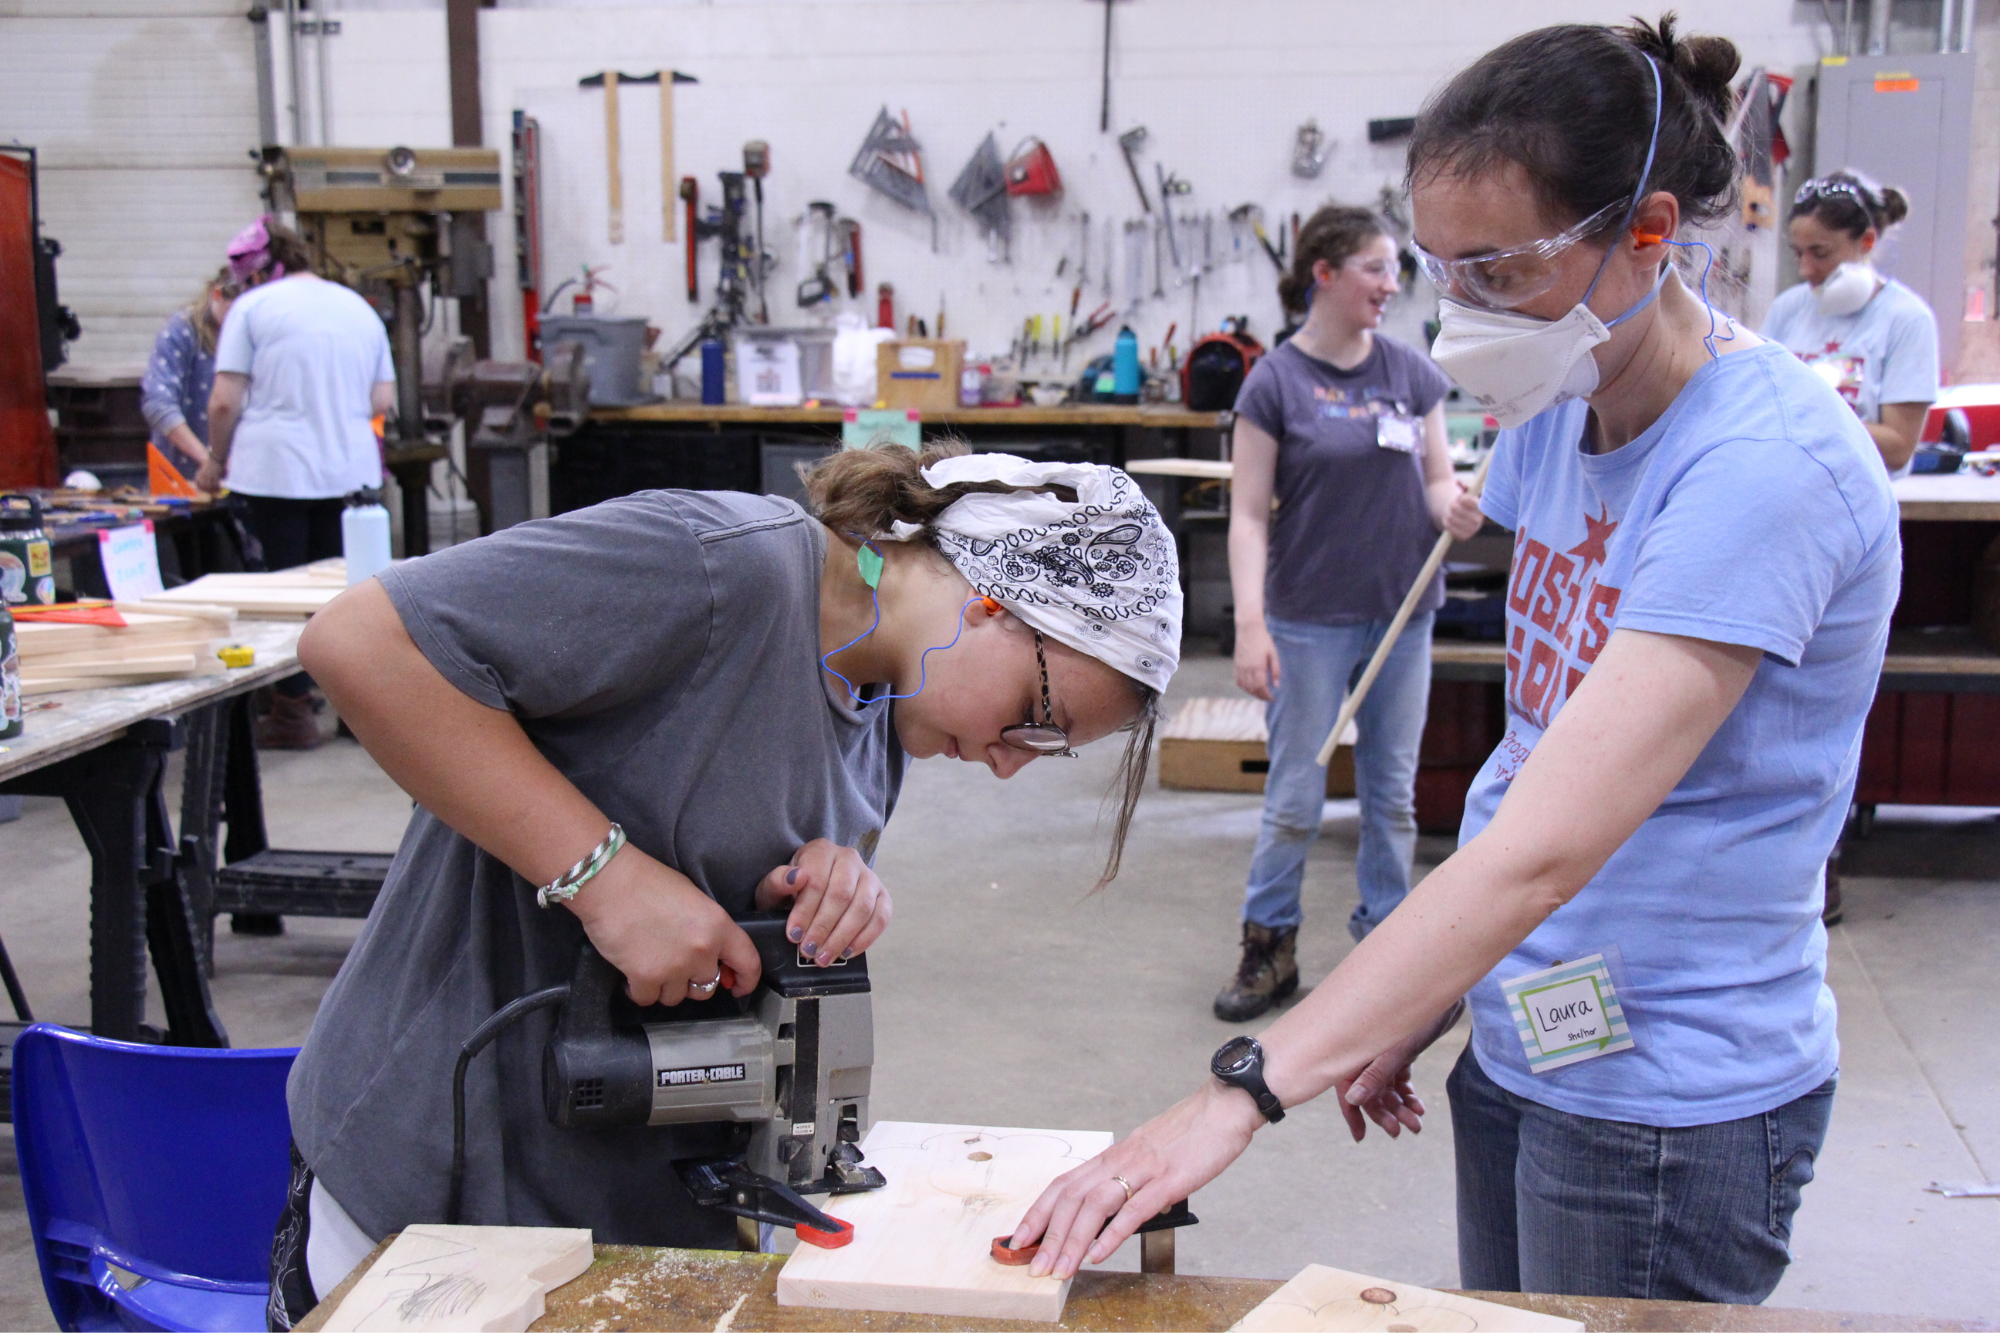 Rosie's Girls camper uses a saw to cut a curve in wood while guided by an instructor